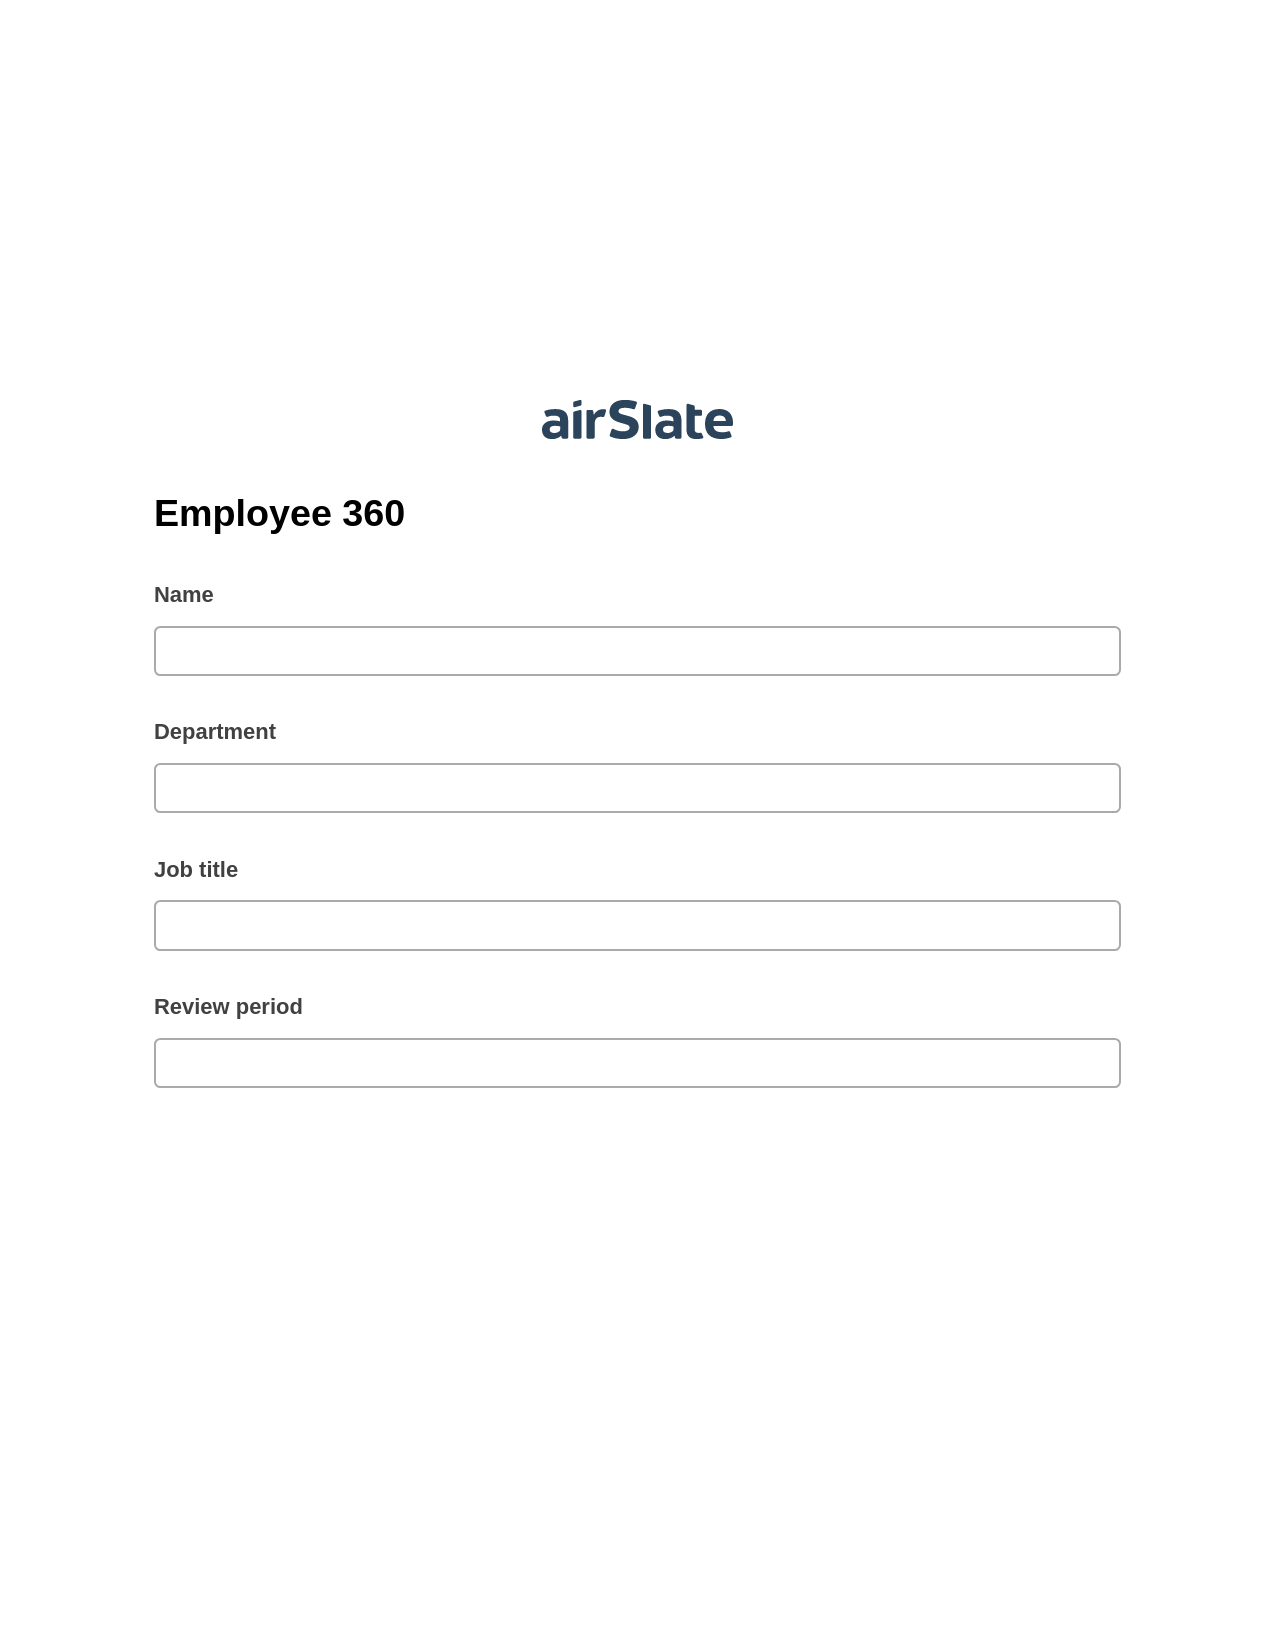 Employee 360 Pre-fill Dropdowns from Google Sheet Bot, Open under a Role Bot, Export to Excel 365 Bot